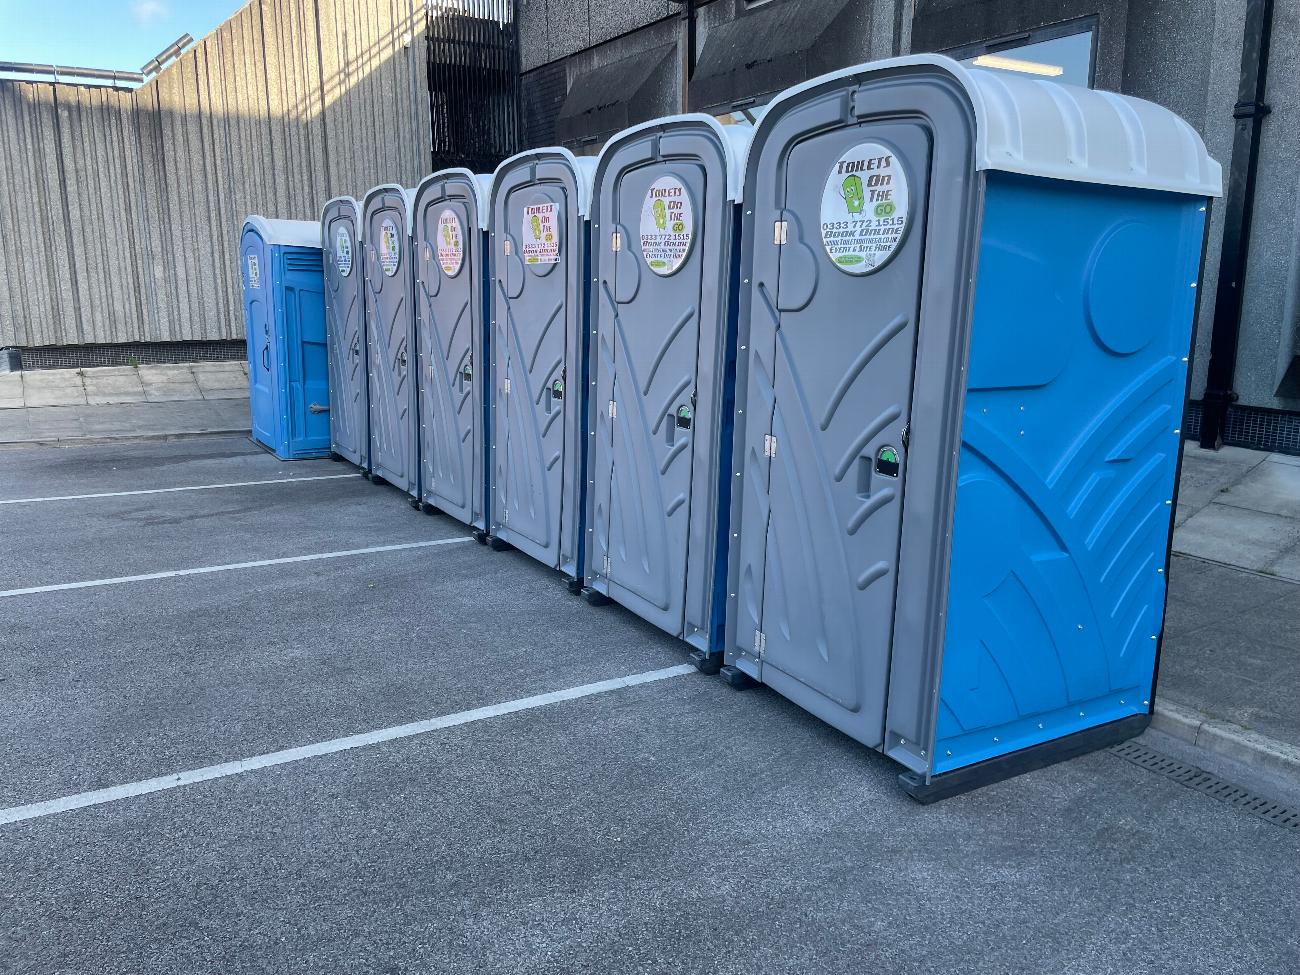 Gallery | Portable Toilet Loo Hire Rental Company in North West uk and Manchester gallery image 44